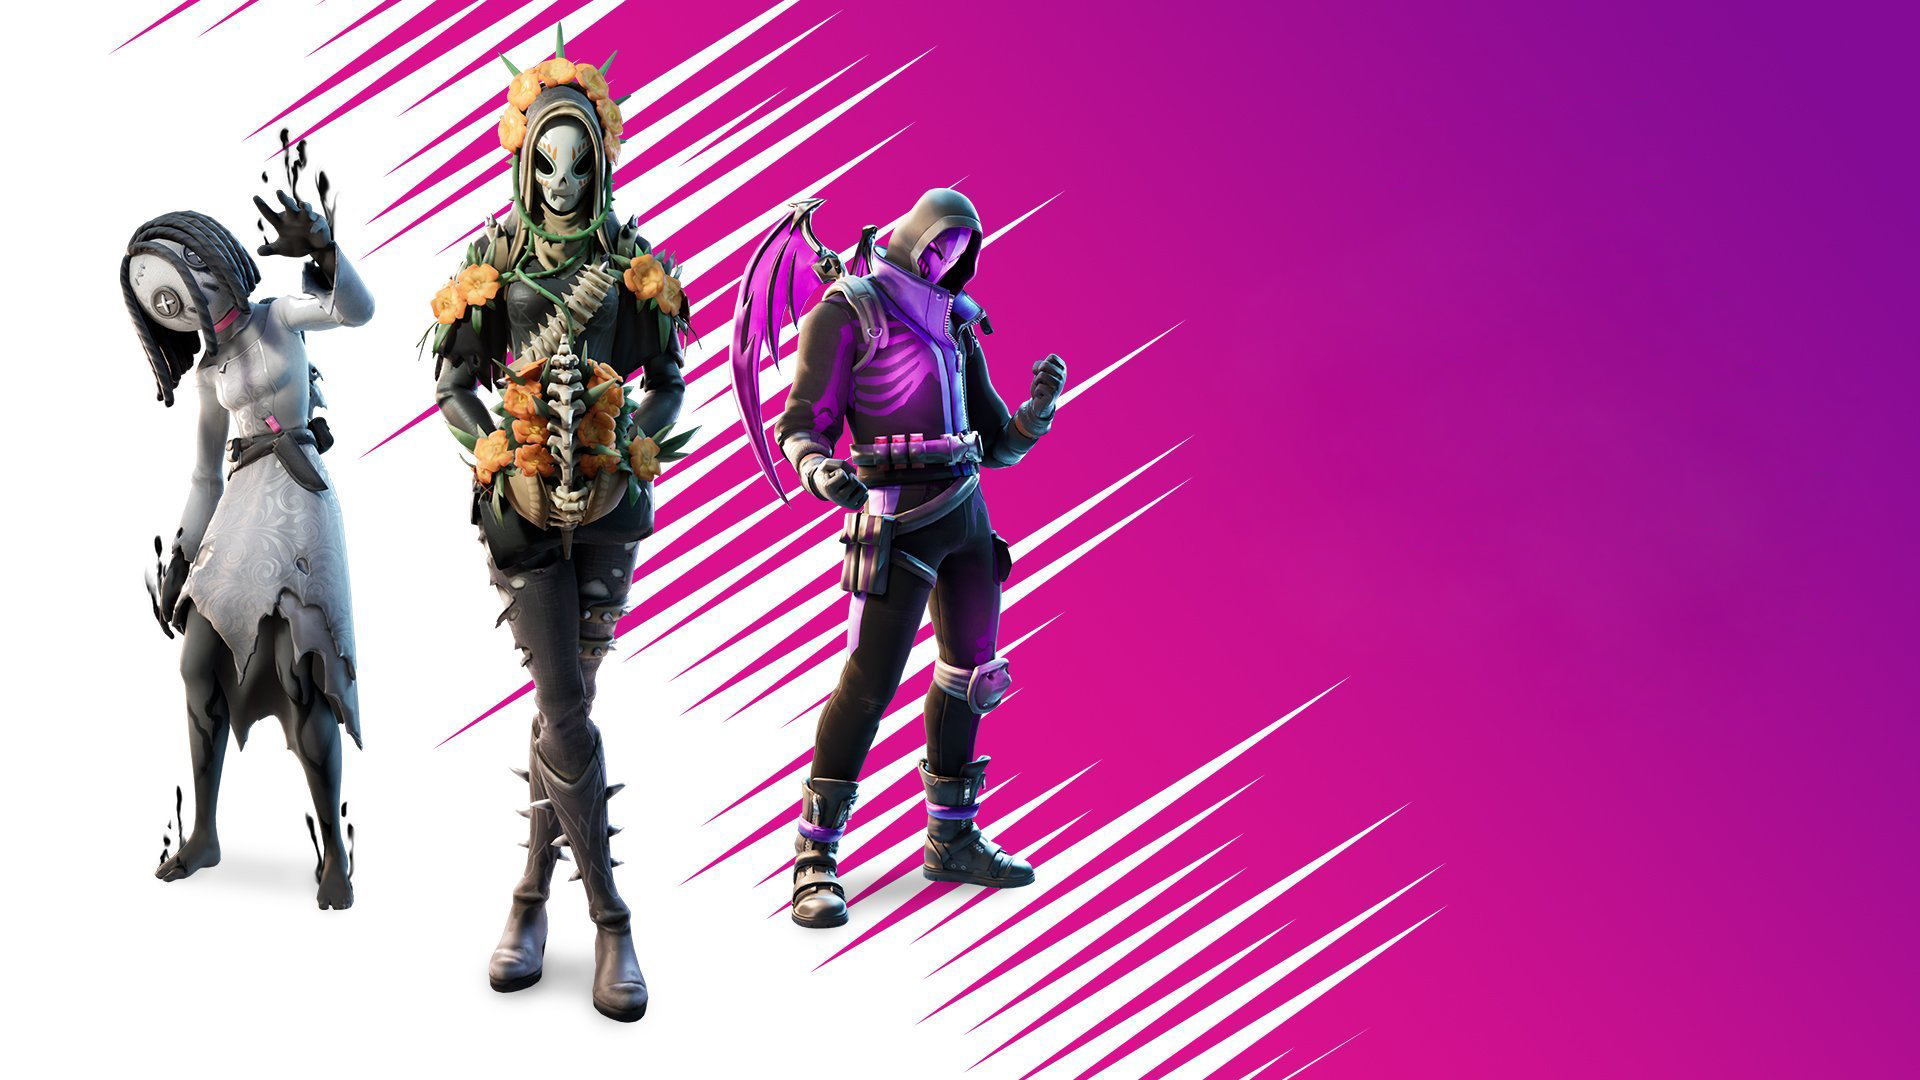 Fortnite wallpapers from a graphics glitch are minimalist and excellent |  GamesRadar+